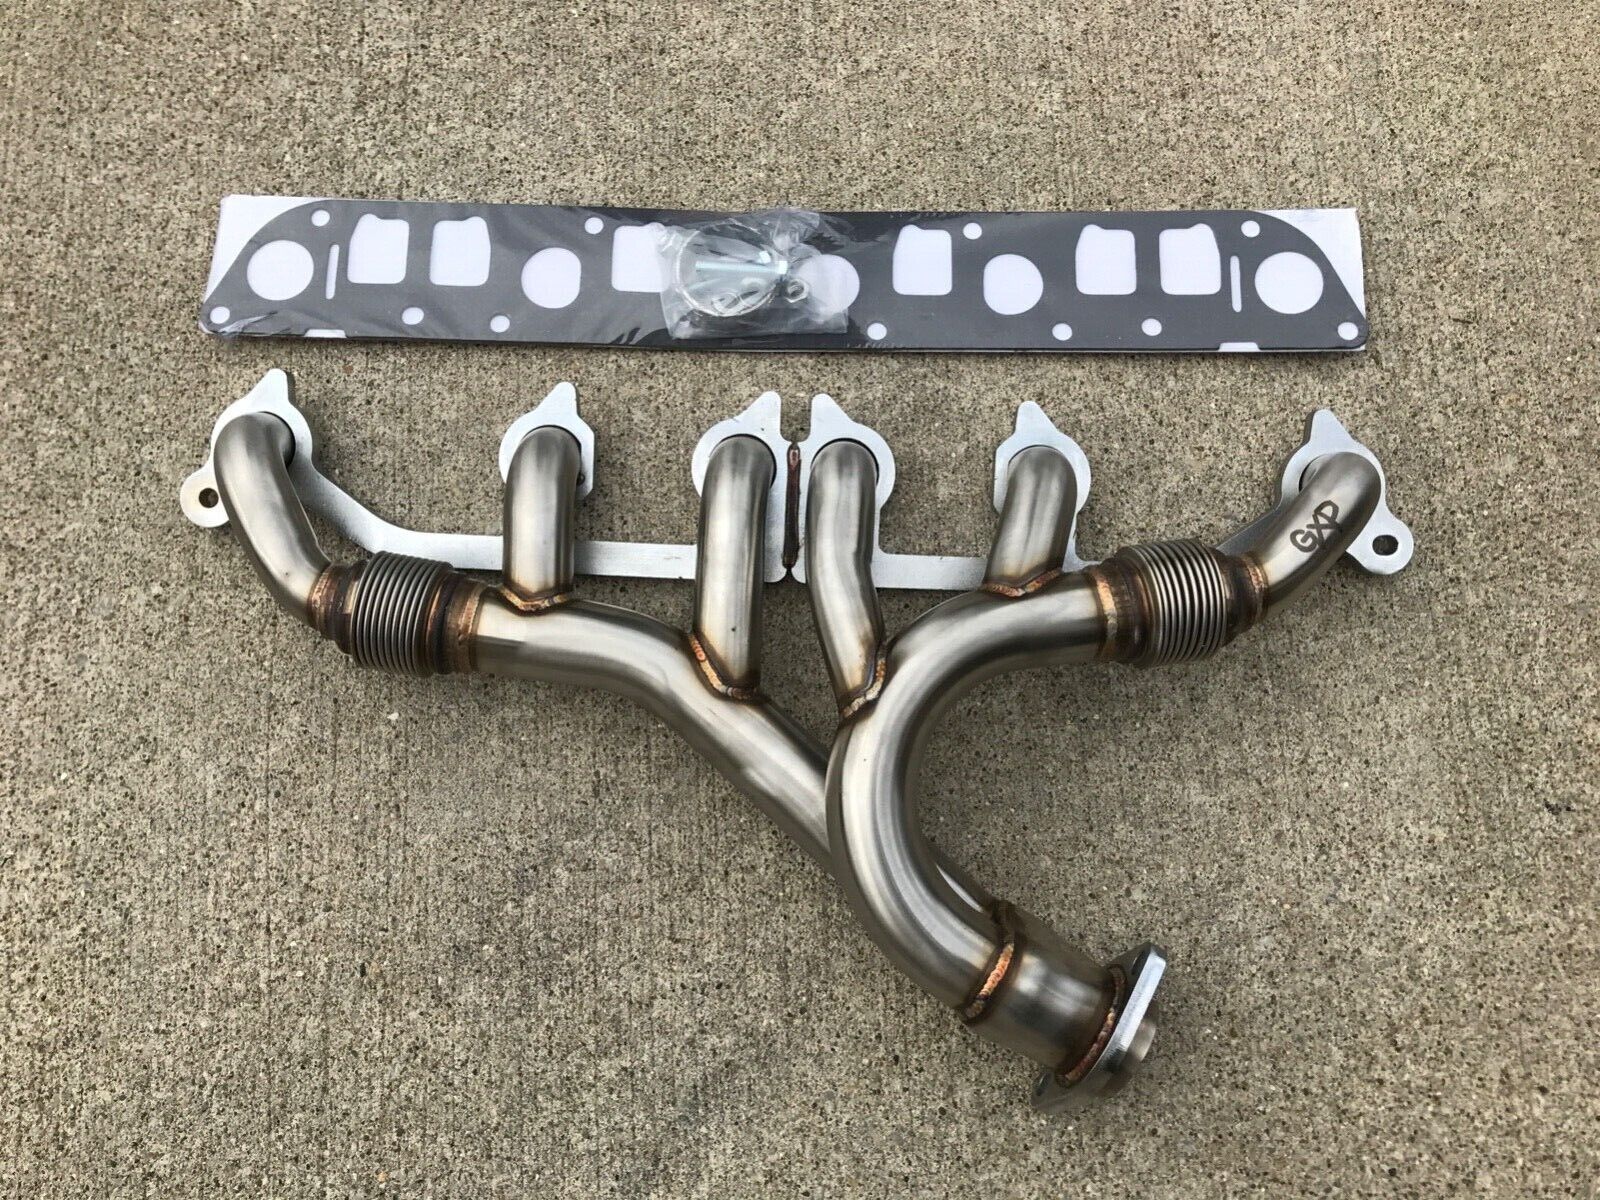 91-99 FOR Jeep Wrangler 4.0 I6 TJ Stainless Exhaust Manifold Header